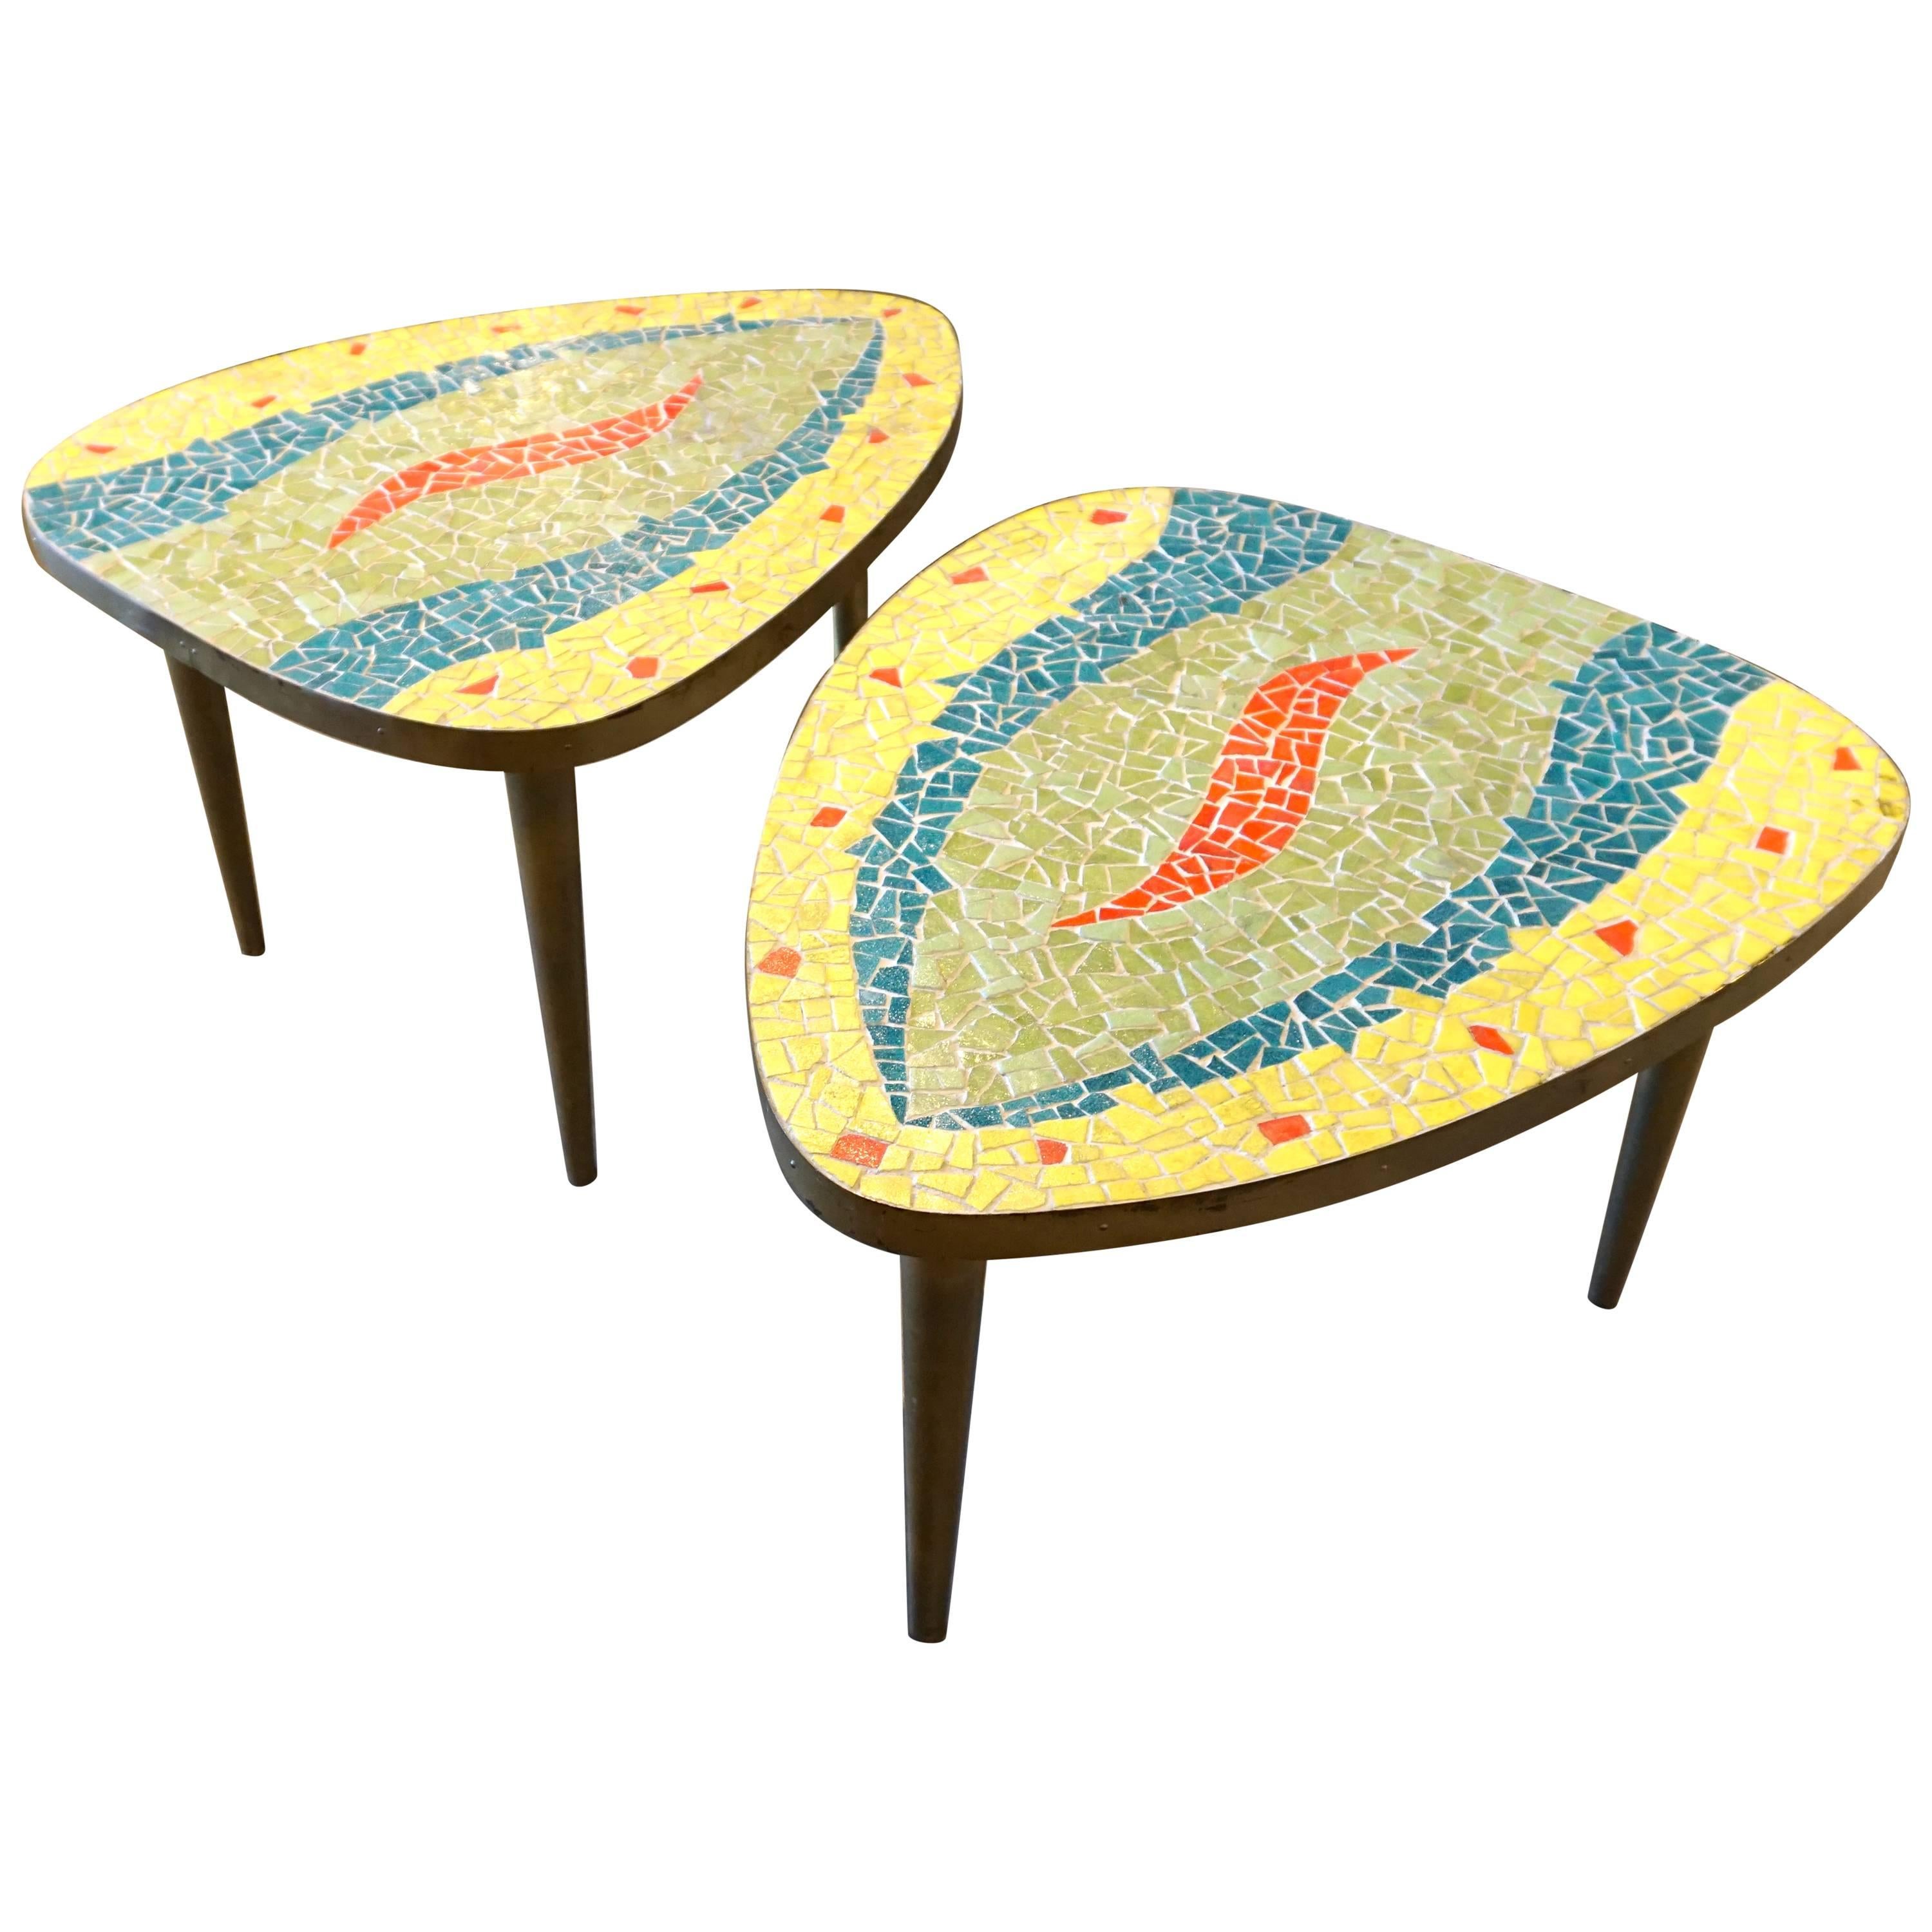 Whimsical Pair of Glass Mosaic-Topped Mid Century Occasional Tables  C.1960s